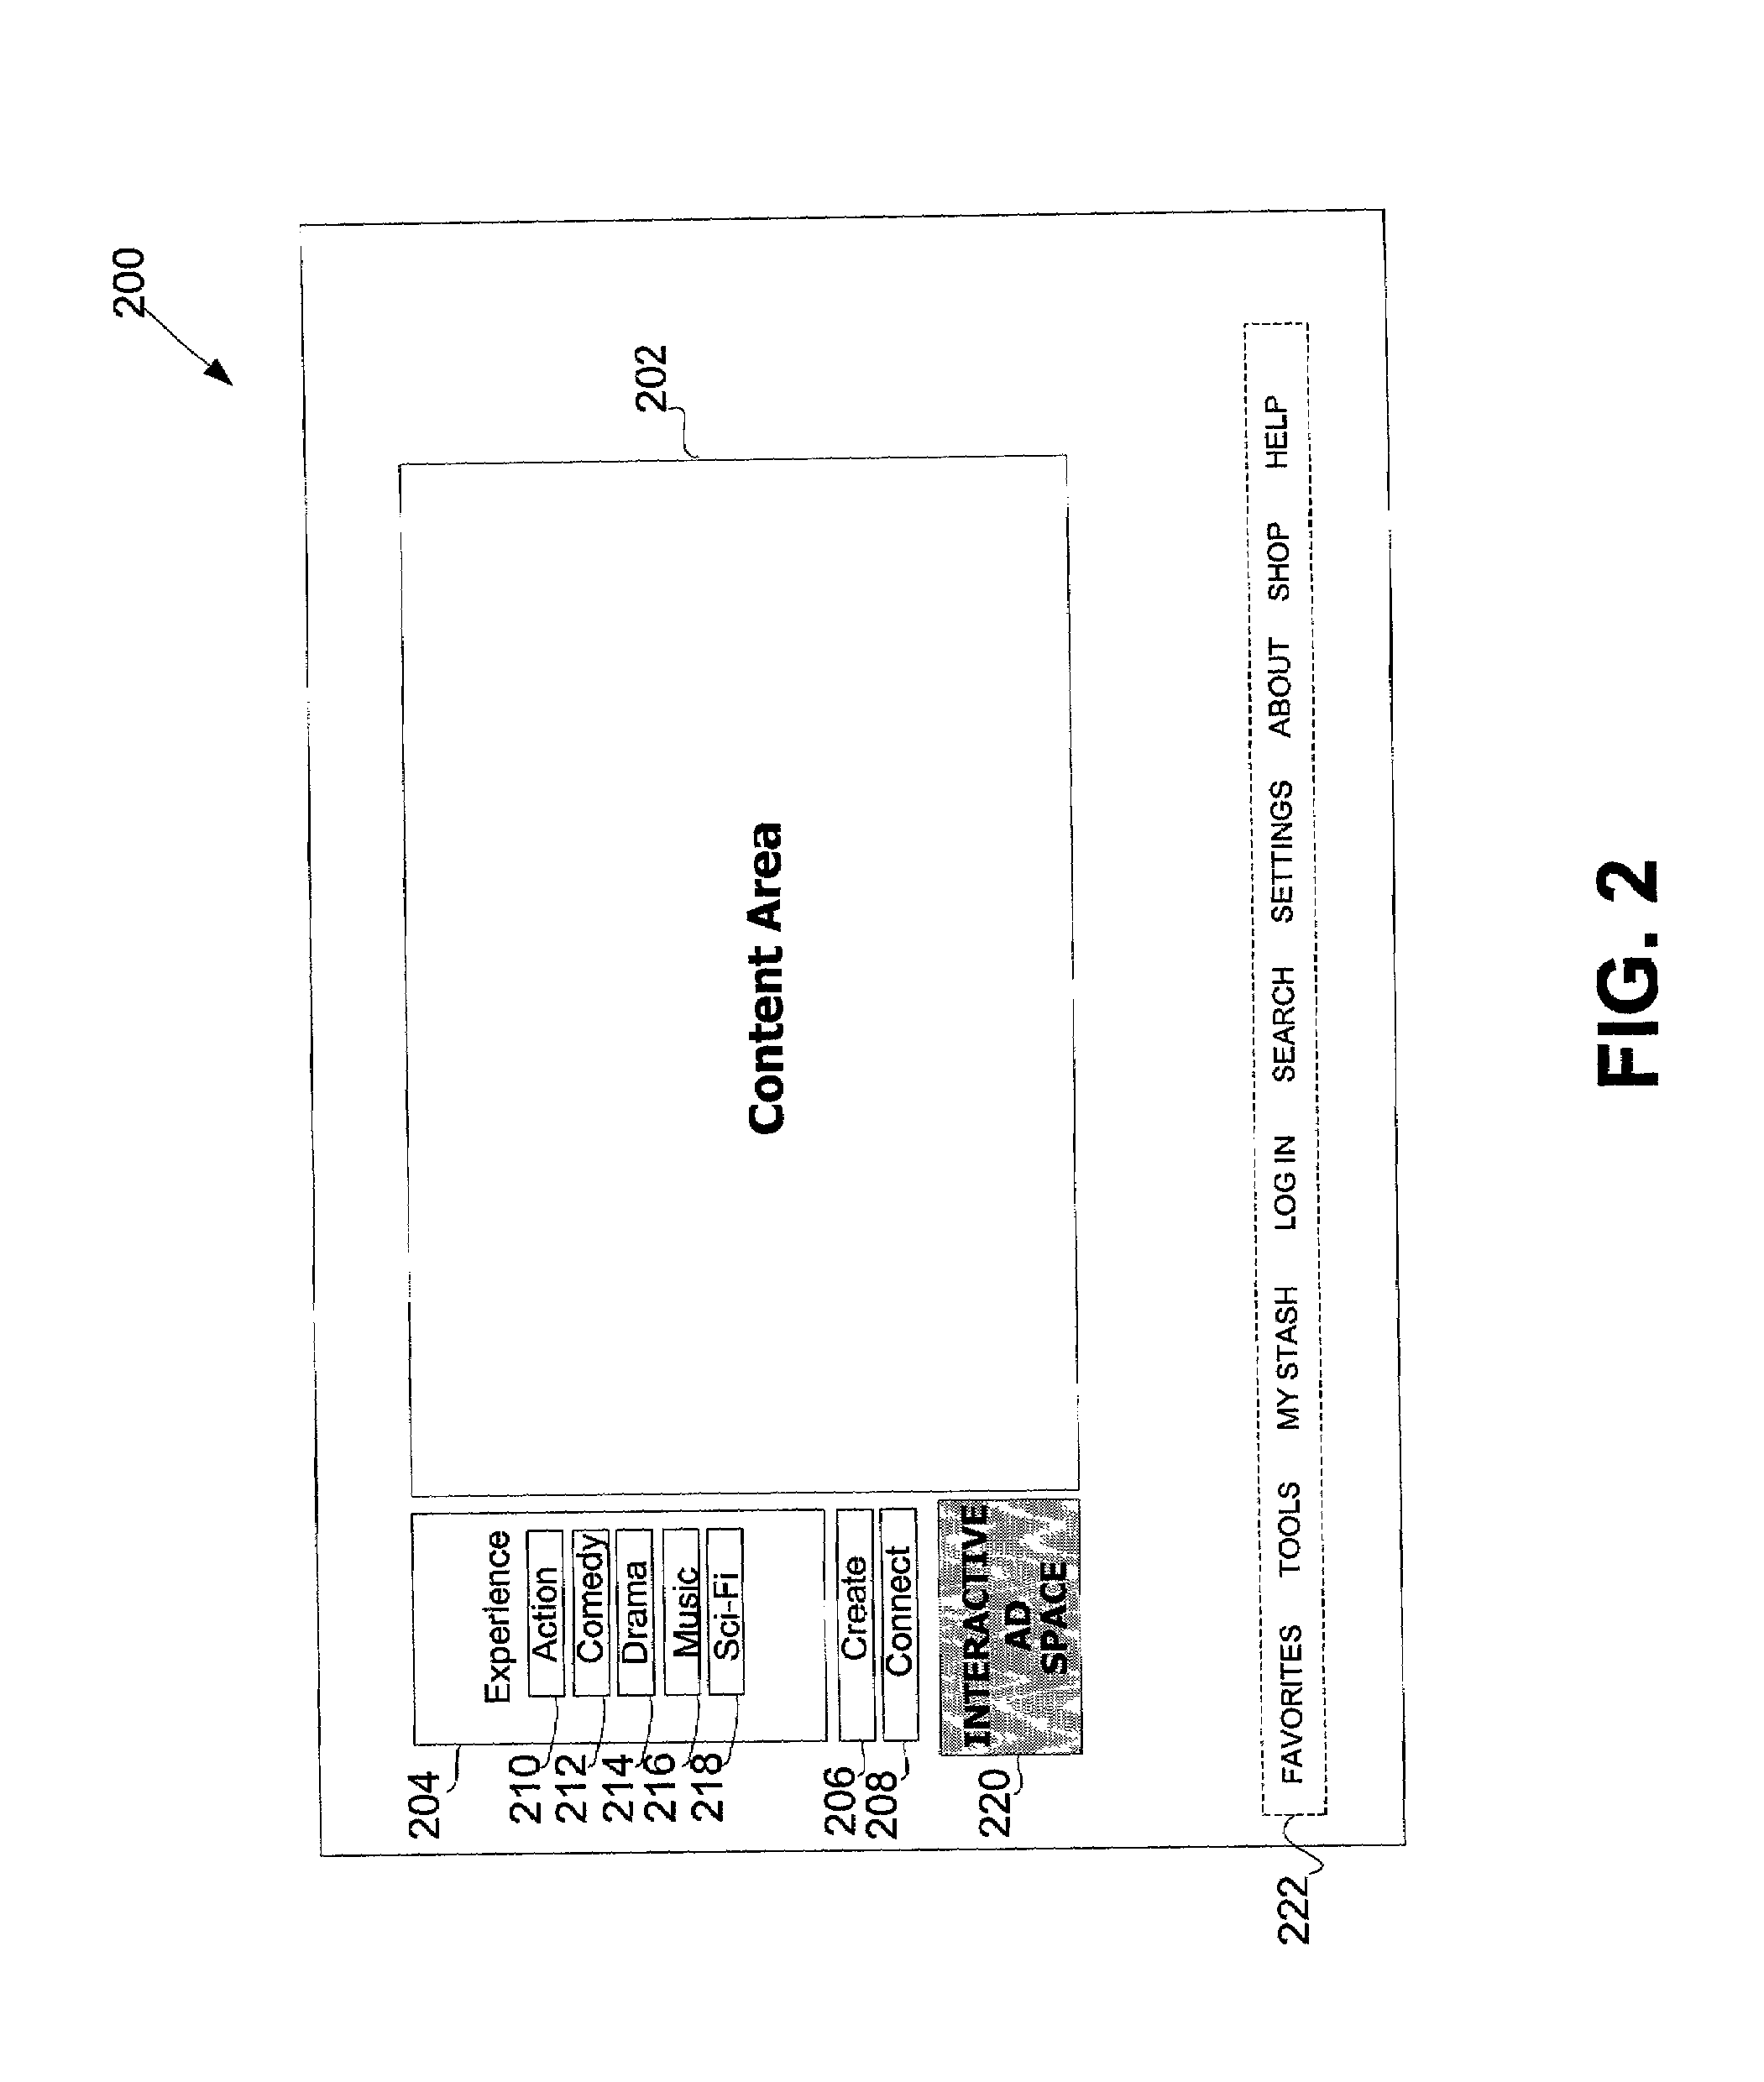 Media content creating and publishing system and process